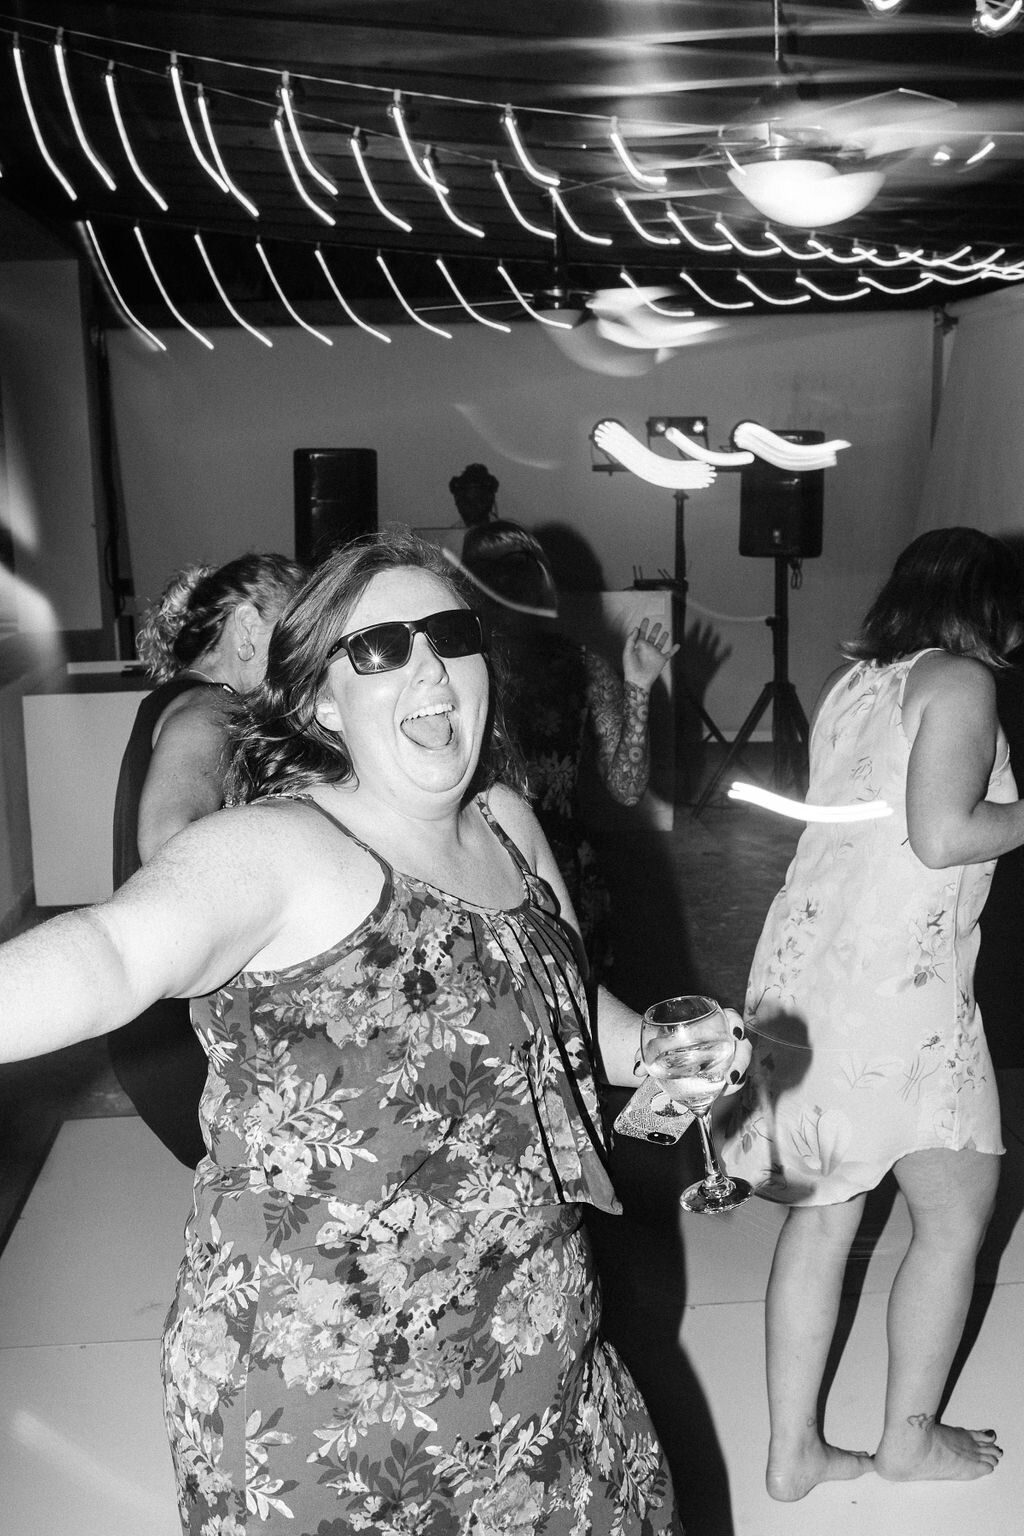 Wedding guest dancing while wearing sunglasses